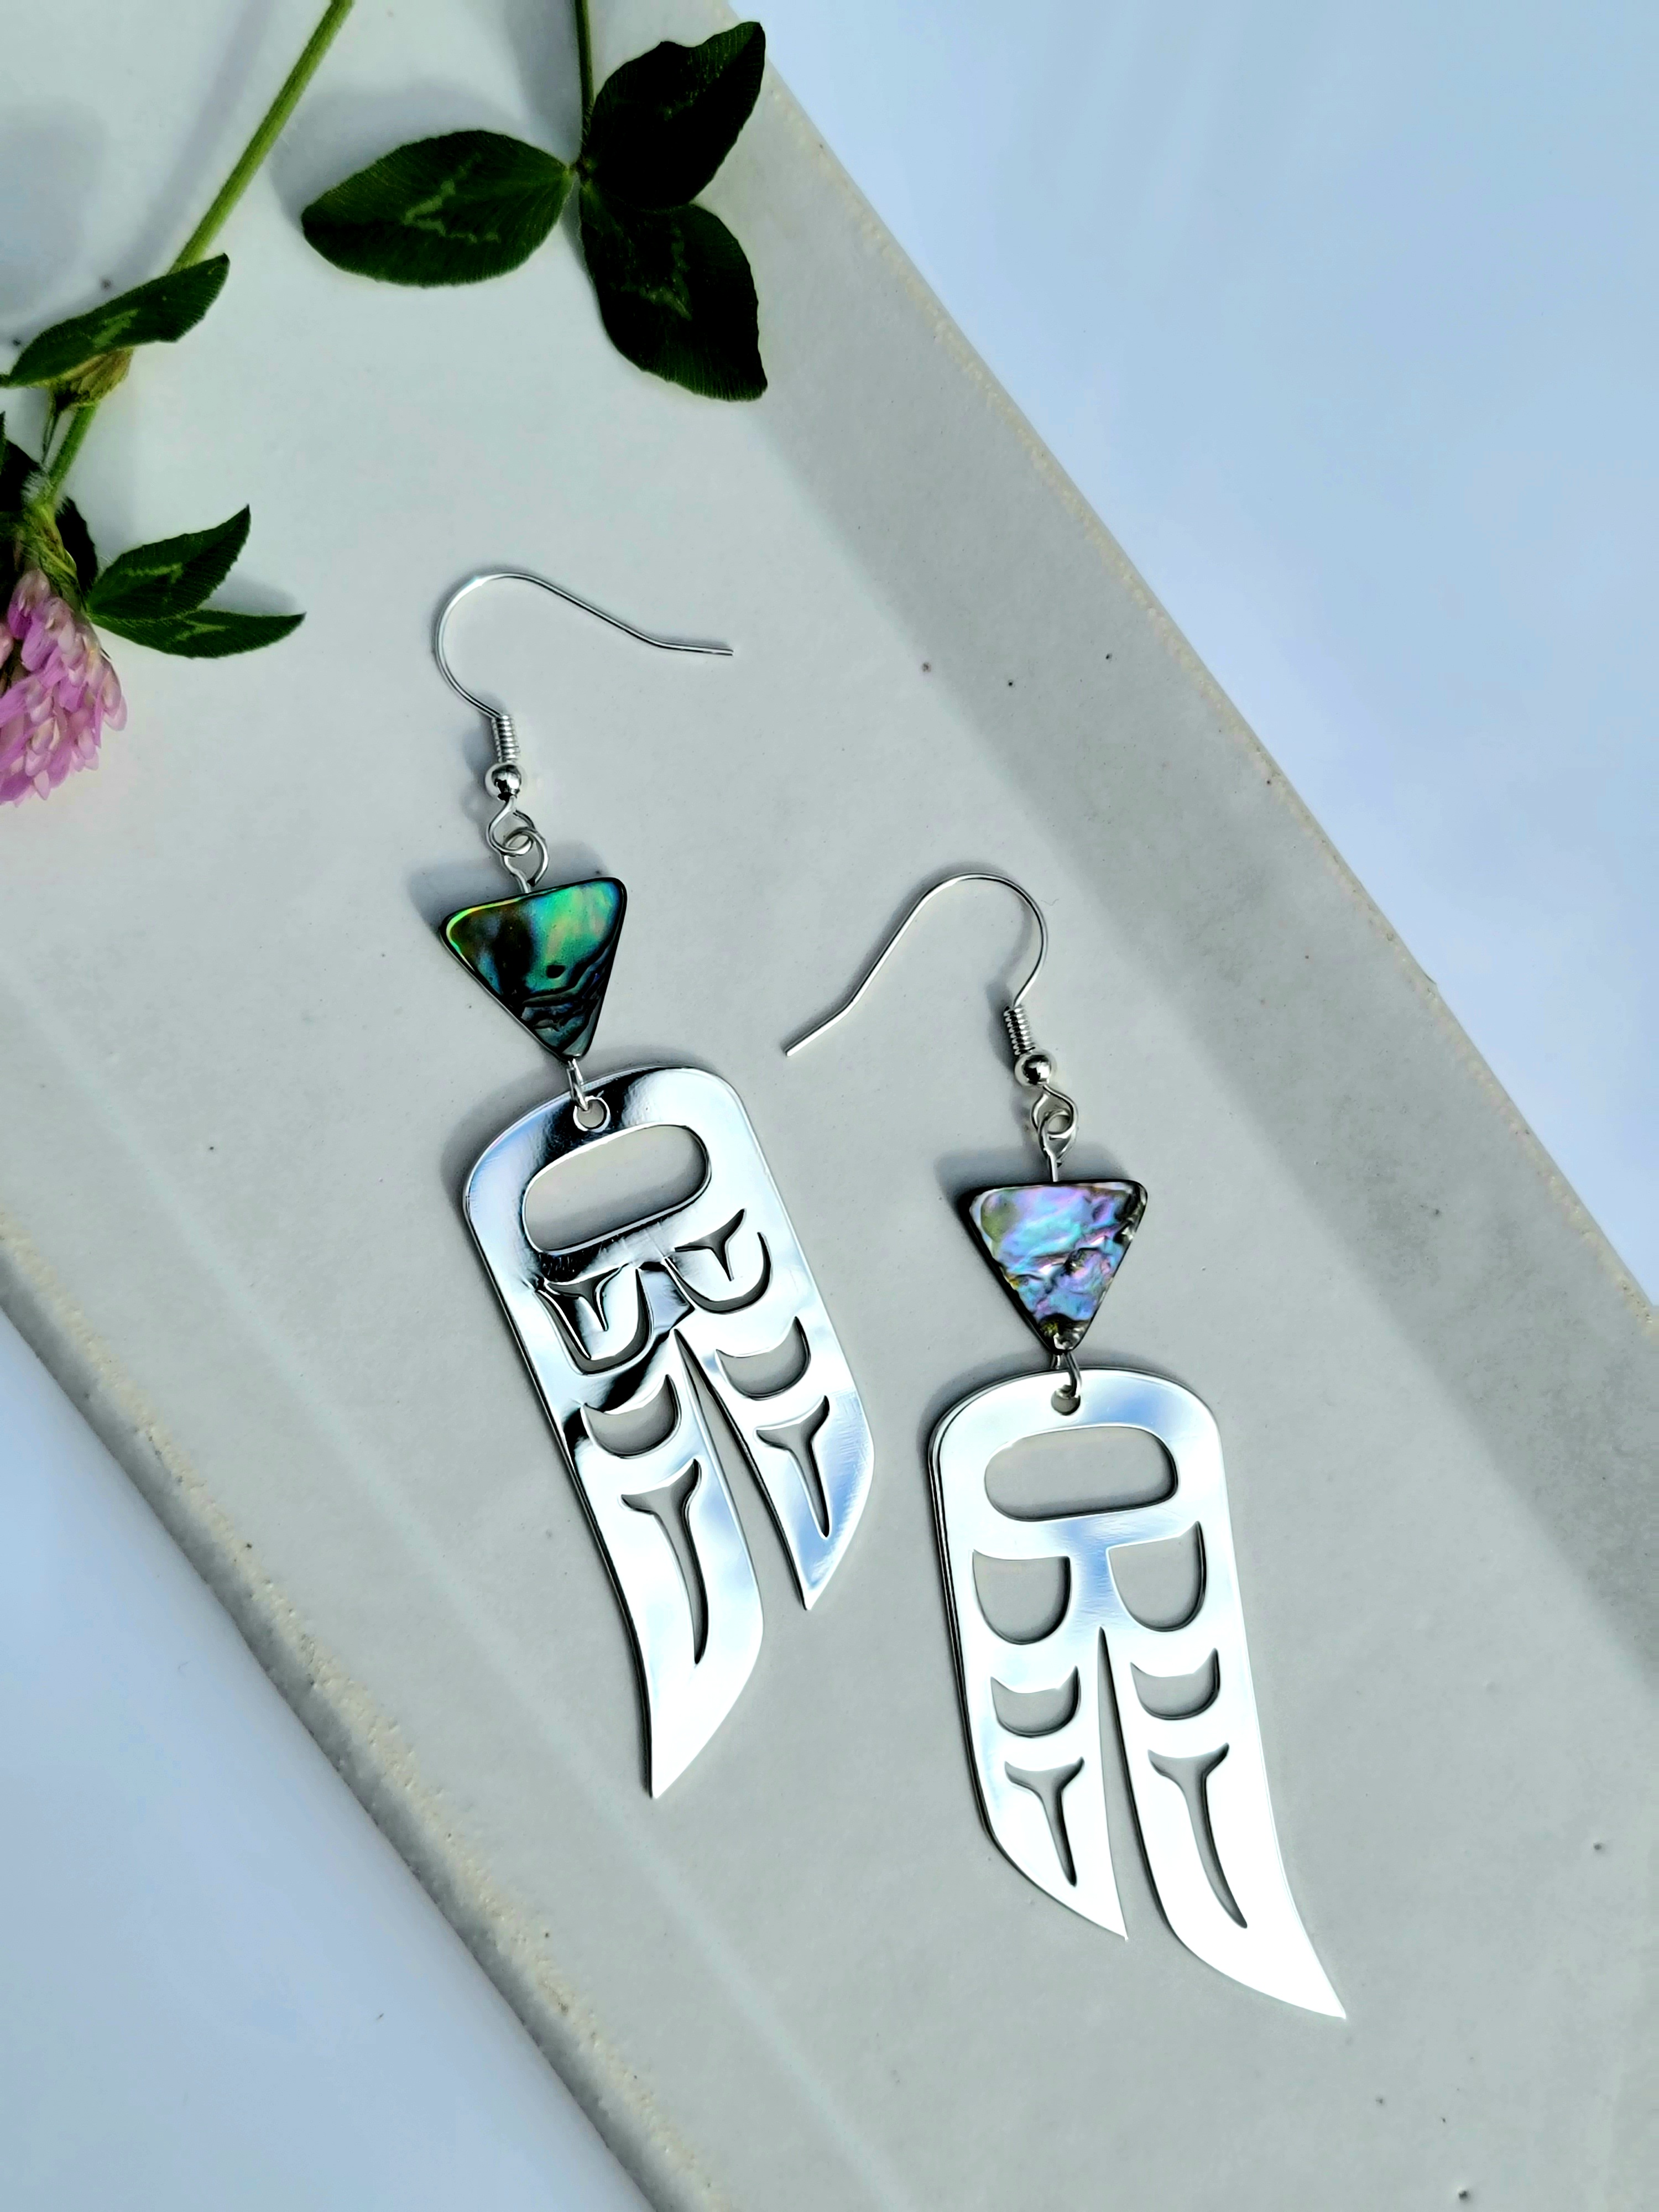 Eagle and raven wing shaped earrings with abalone gem.